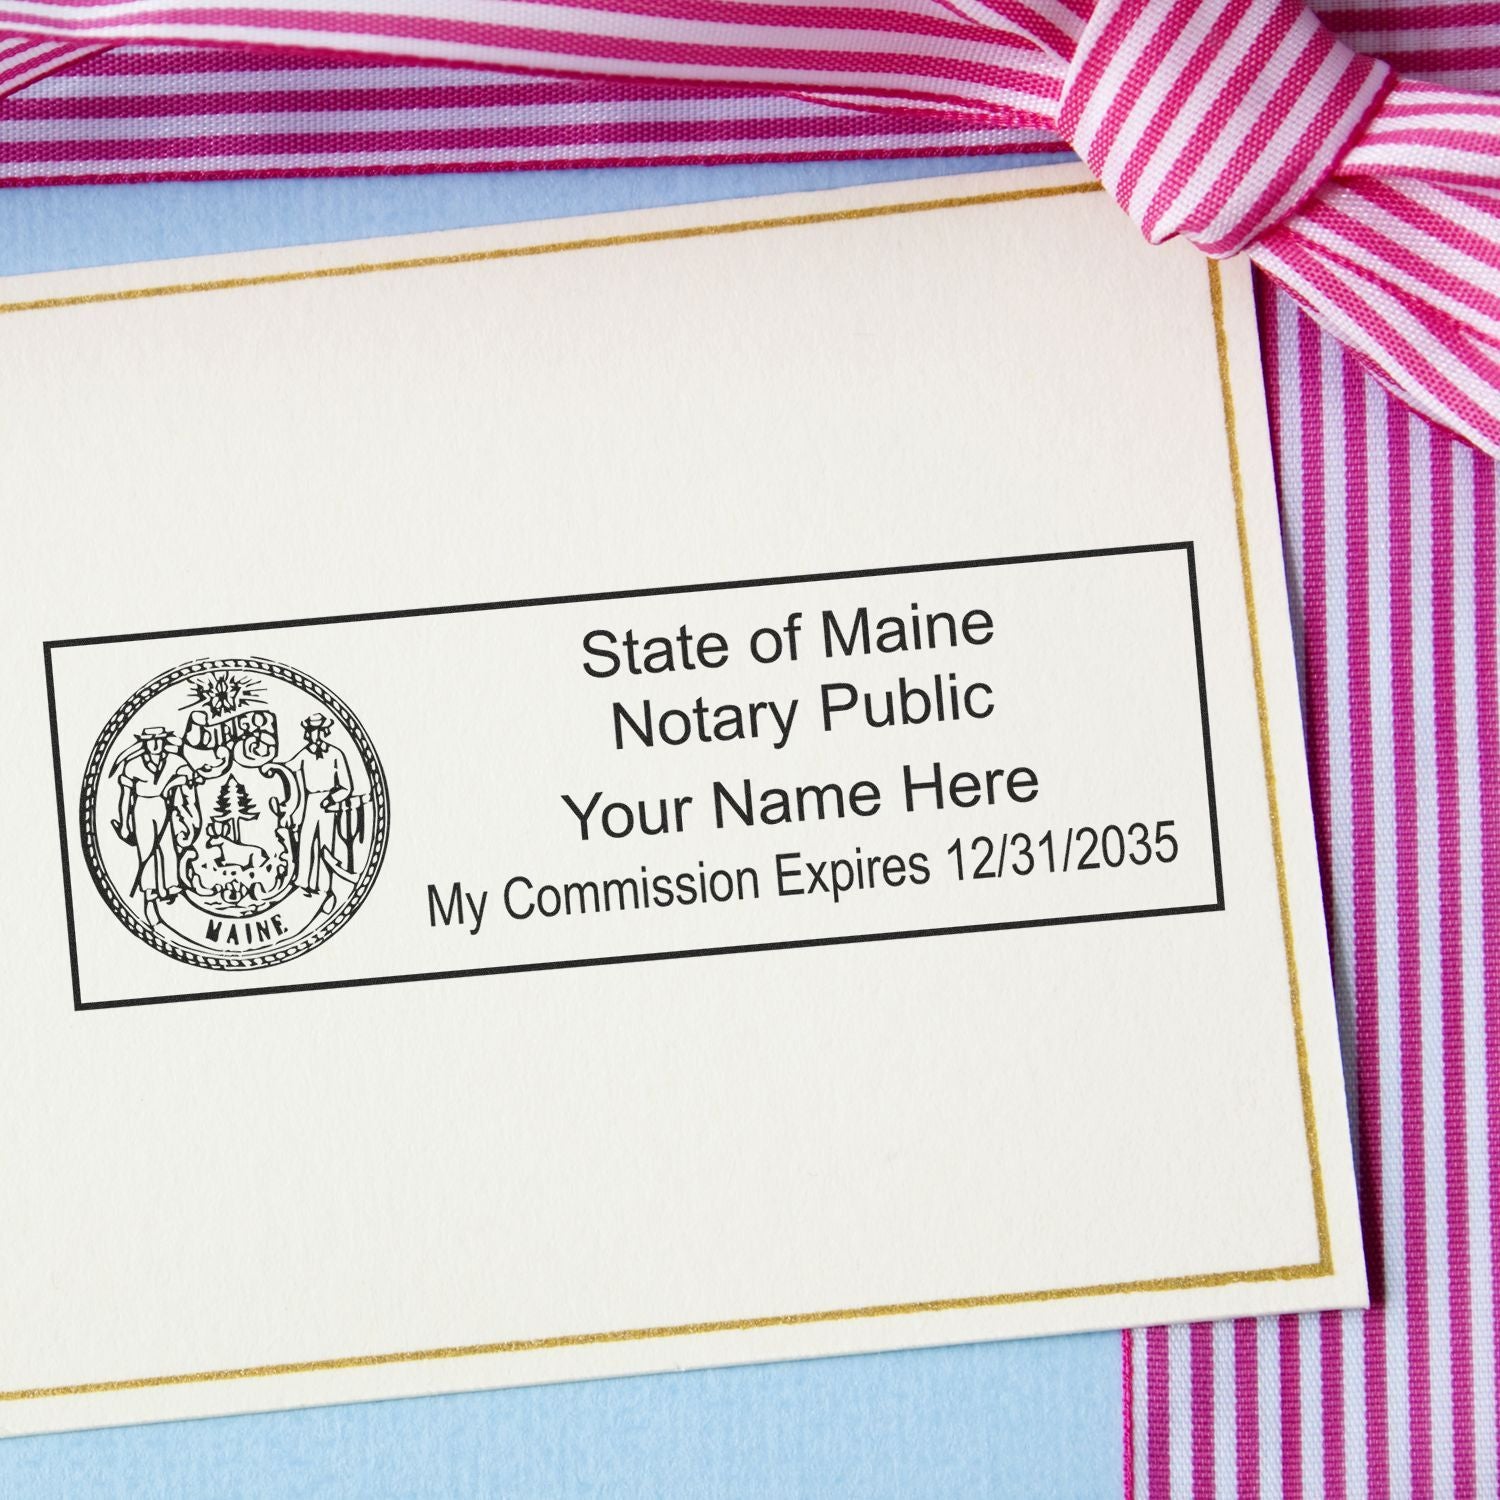 A lifestyle photo showing a stamped image of the Heavy-Duty Maine Rectangular Notary Stamp on a piece of paper